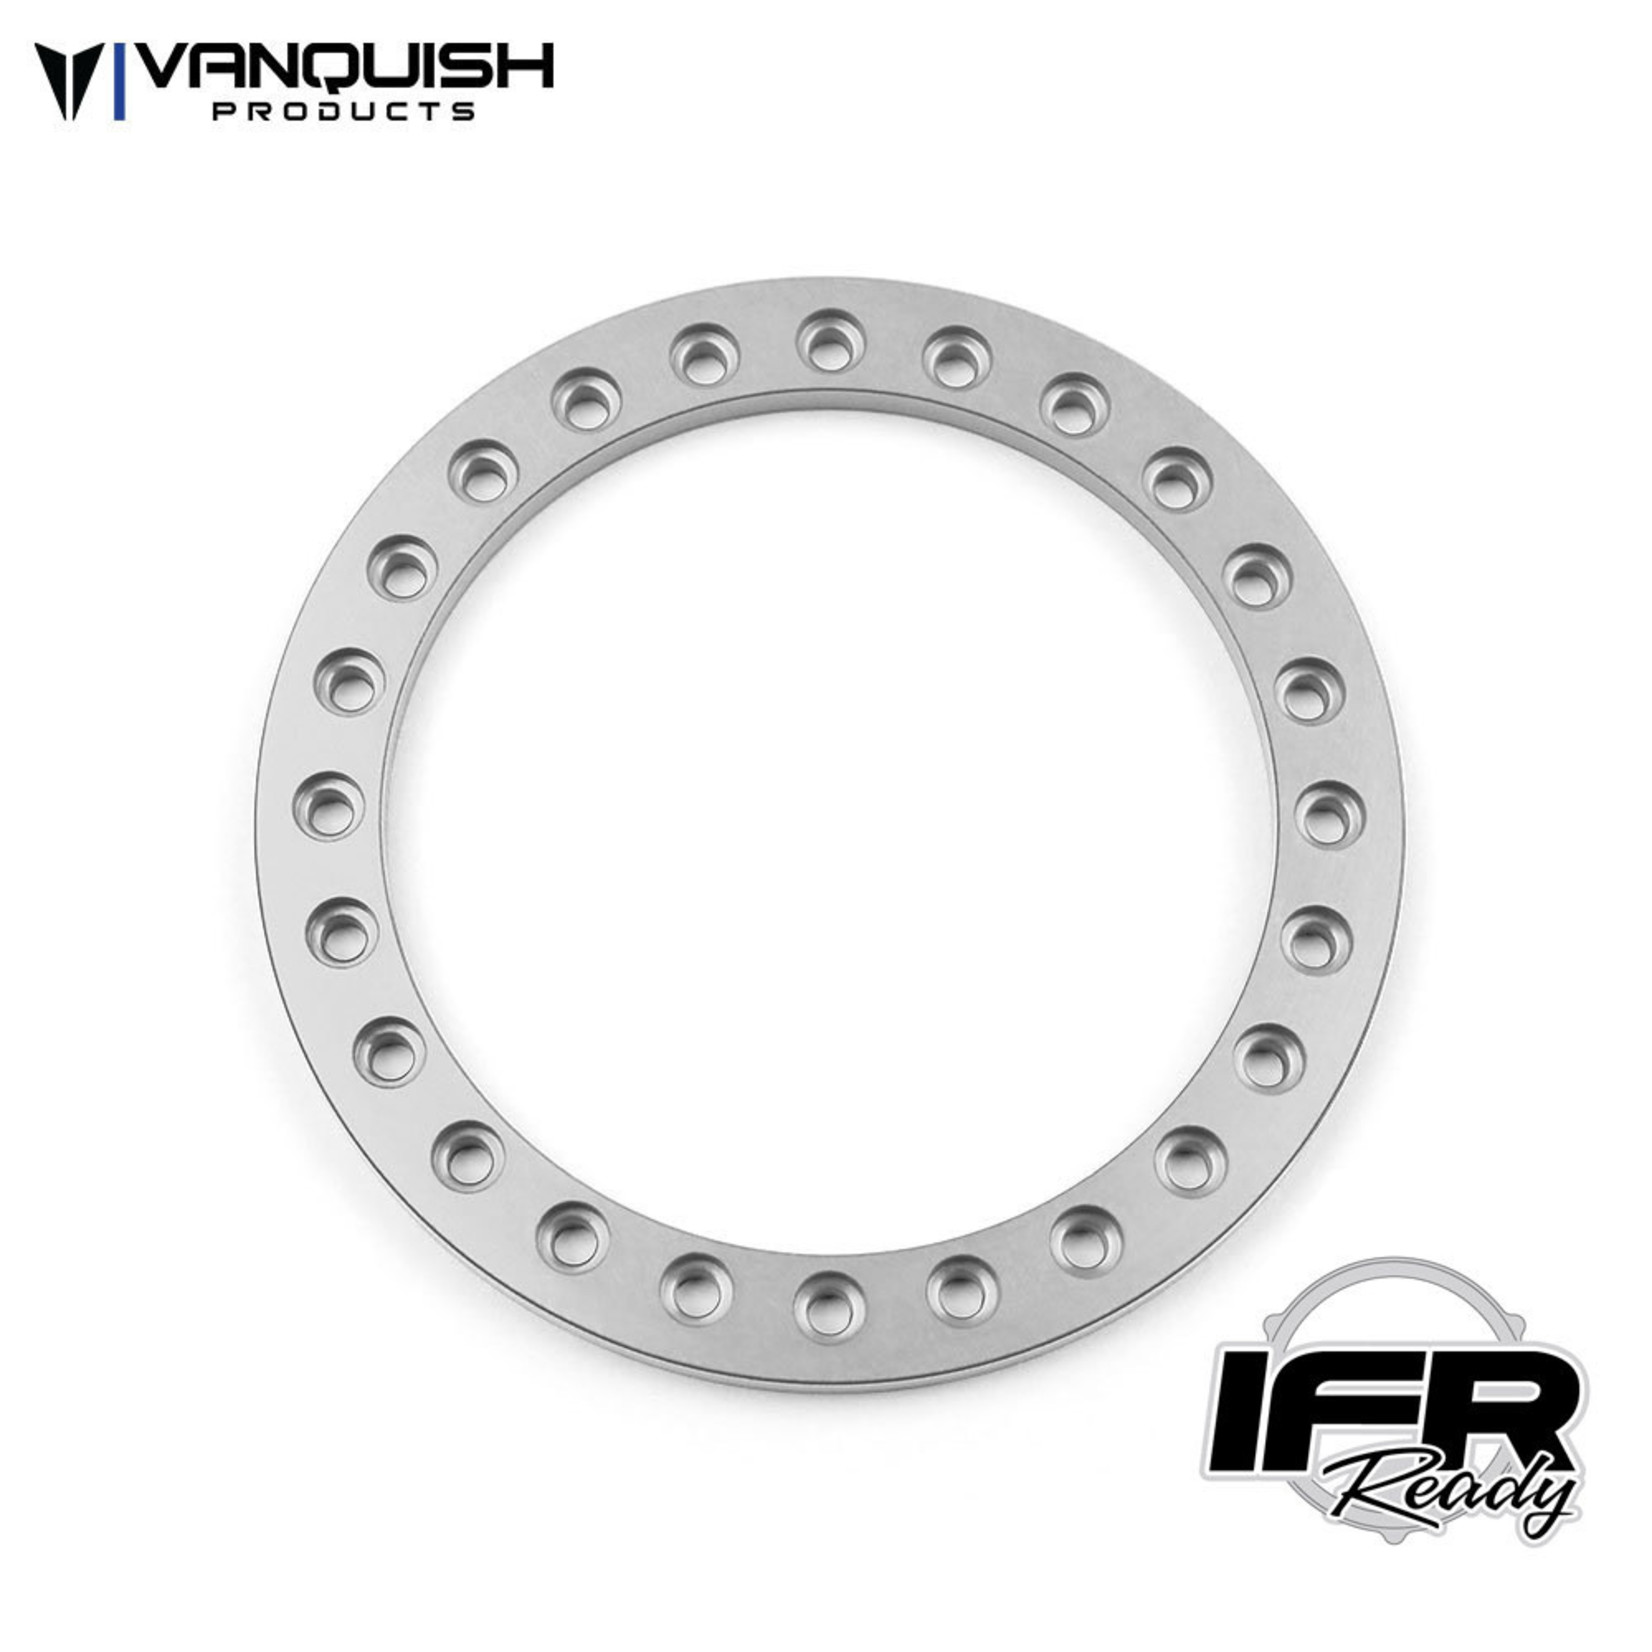 Vanquish Products 1.9 IFR Original Beadlock Ring Clear Anodized (1)